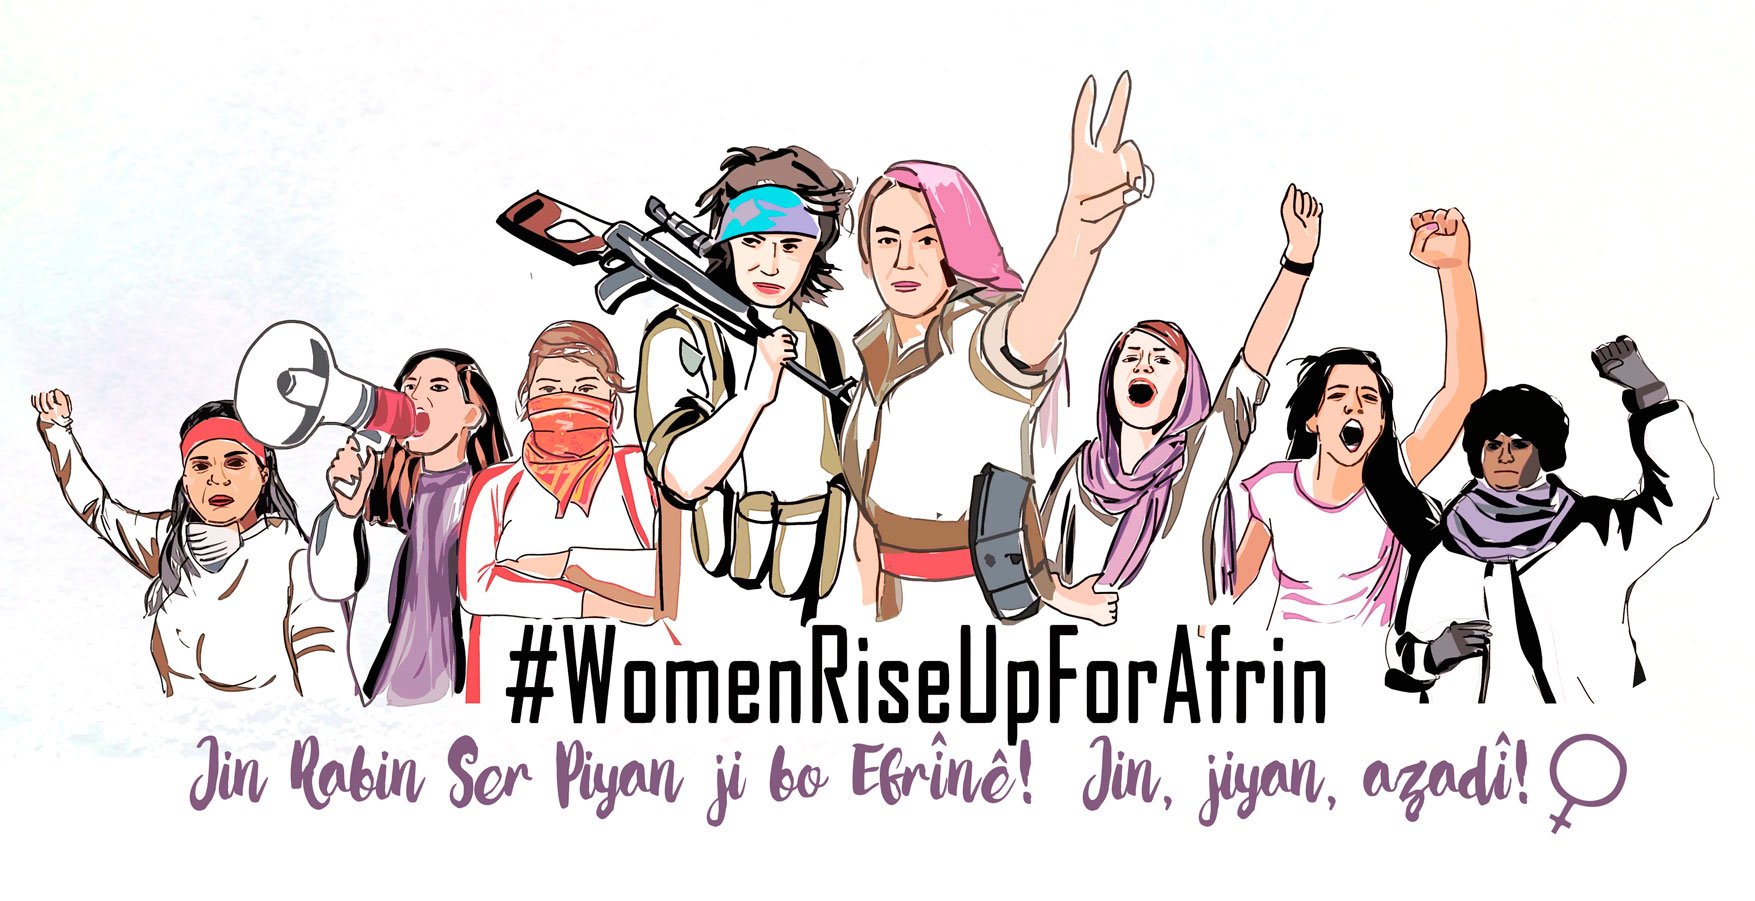 Solidarity actions with the #WomenRiseUpForAfrin campaign